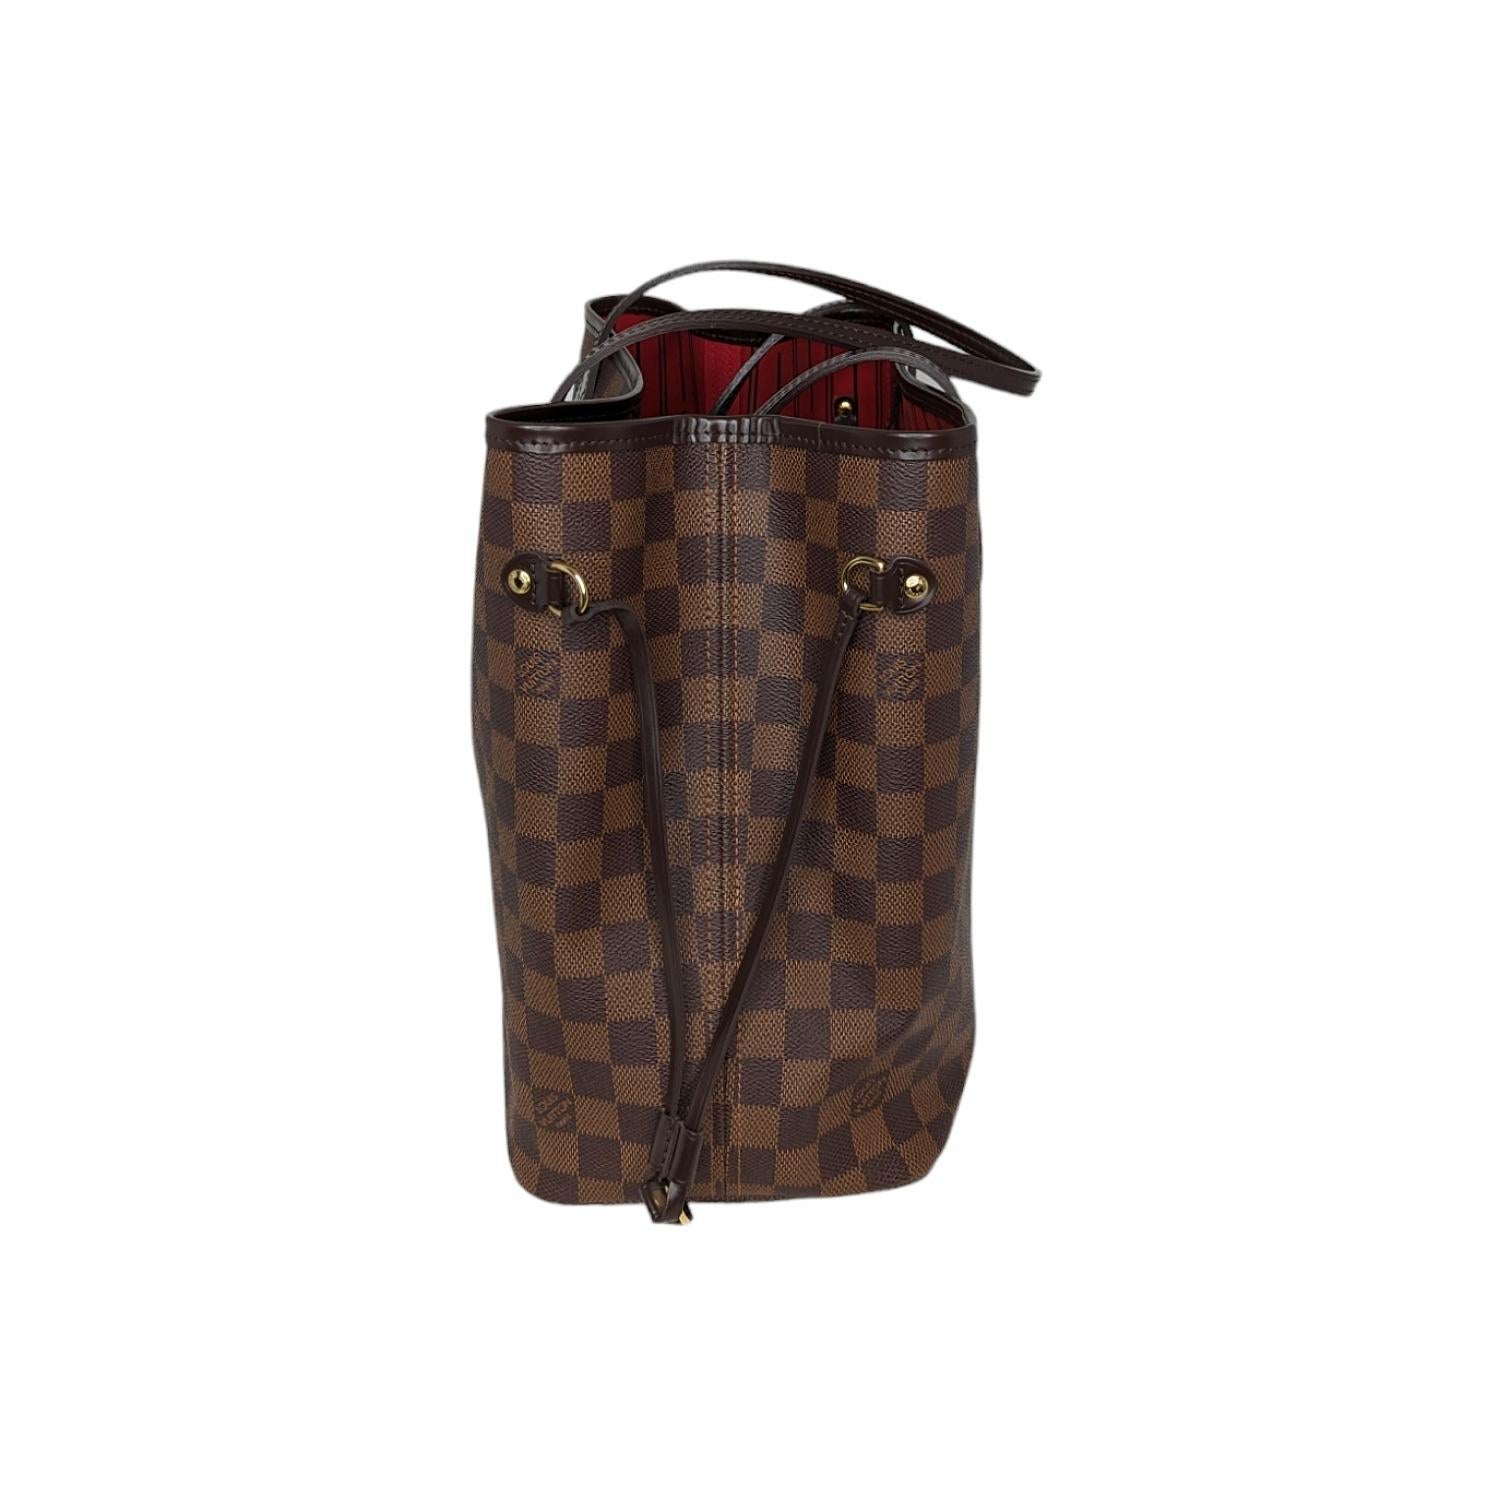 Louis Vuitton 2011 Damier Ebene Neverfull MM Tote In Excellent Condition For Sale In Scottsdale, AZ